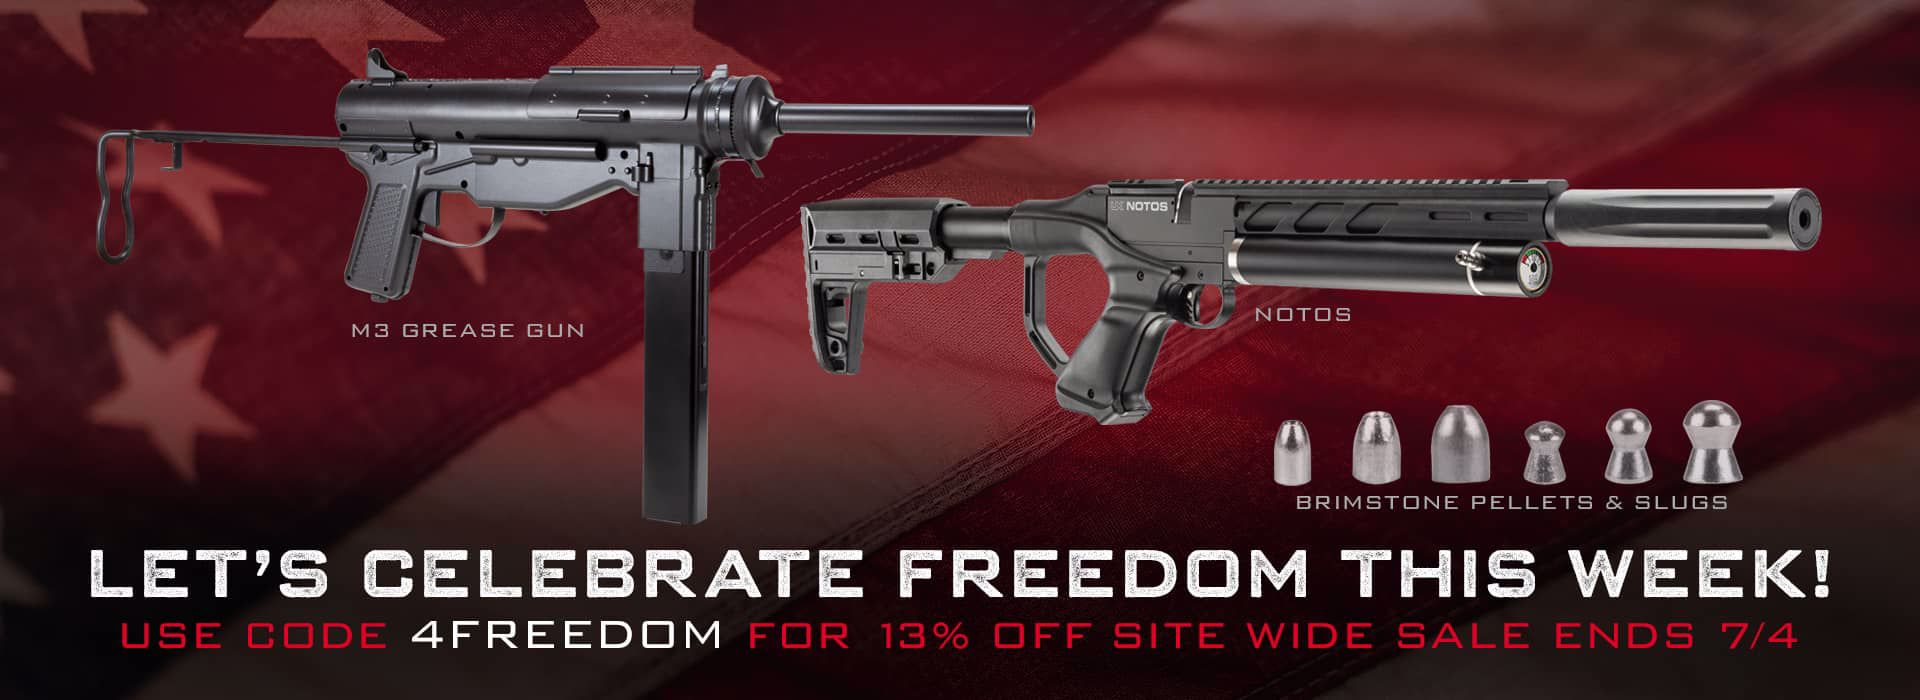 Let's Celebrate Freedom this Week! Use code 4FREEDOM for 13% off site wide. Sale ends 7/4